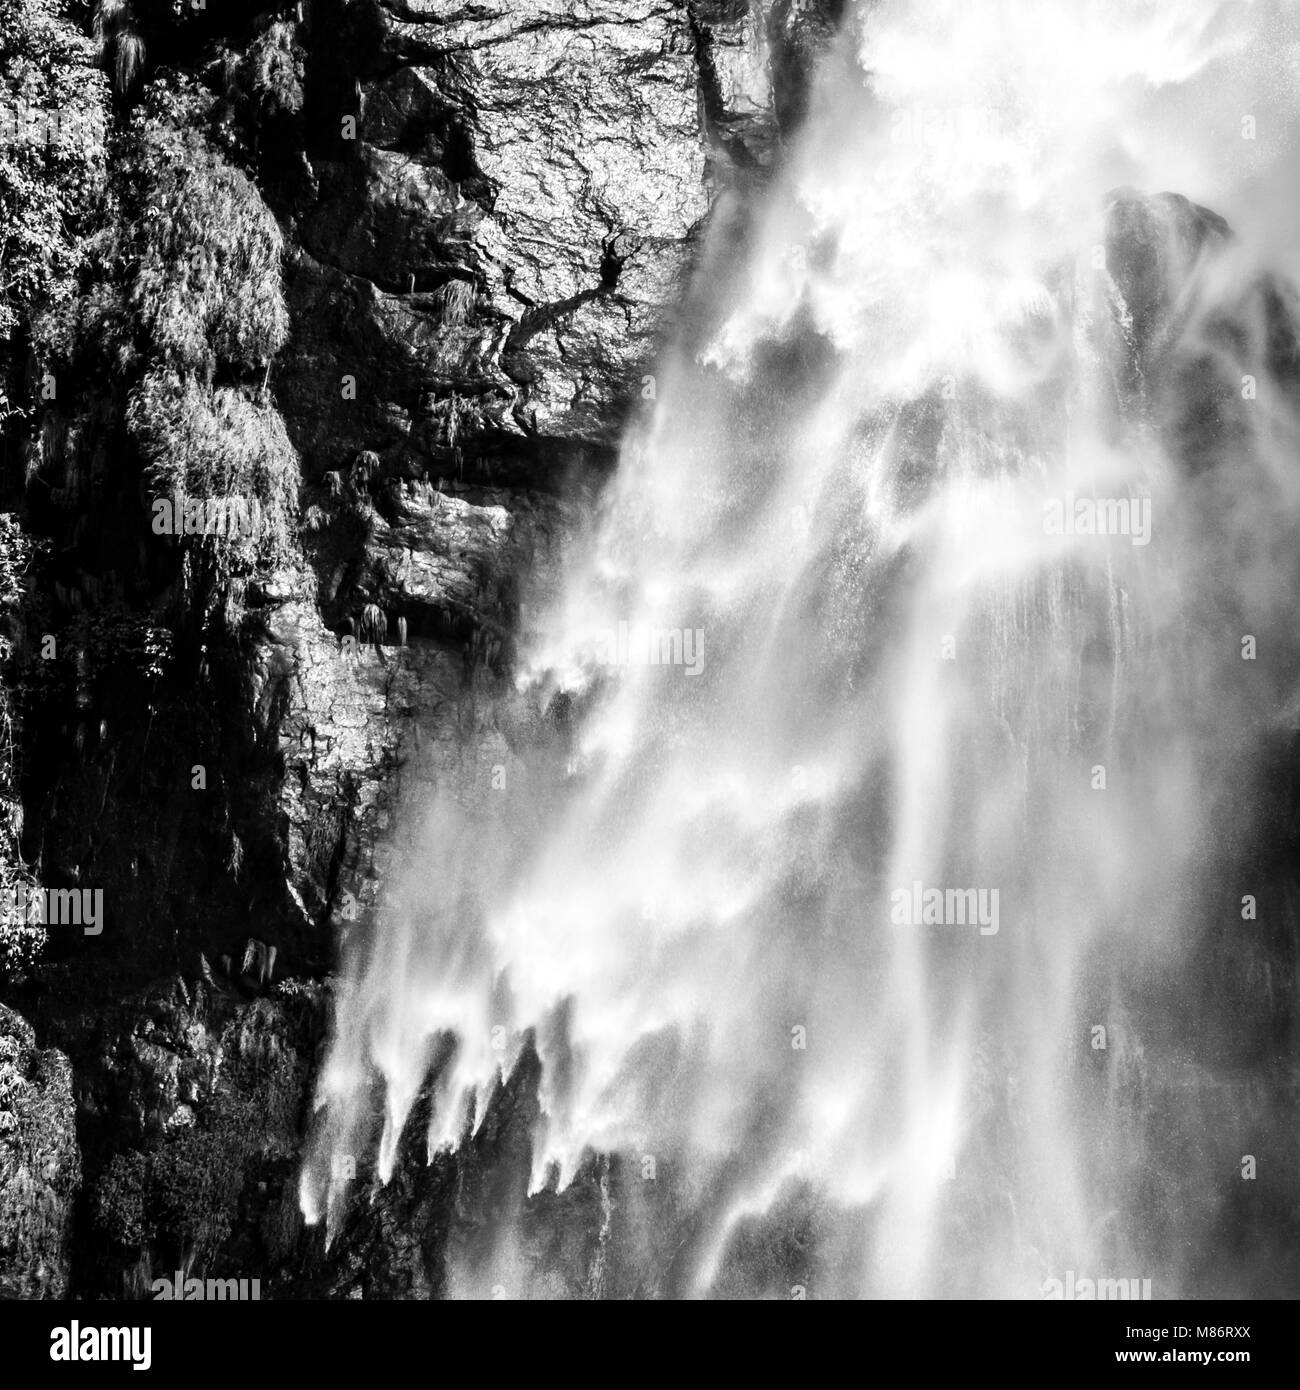 Falling Water Black And White Square Abstract Nature